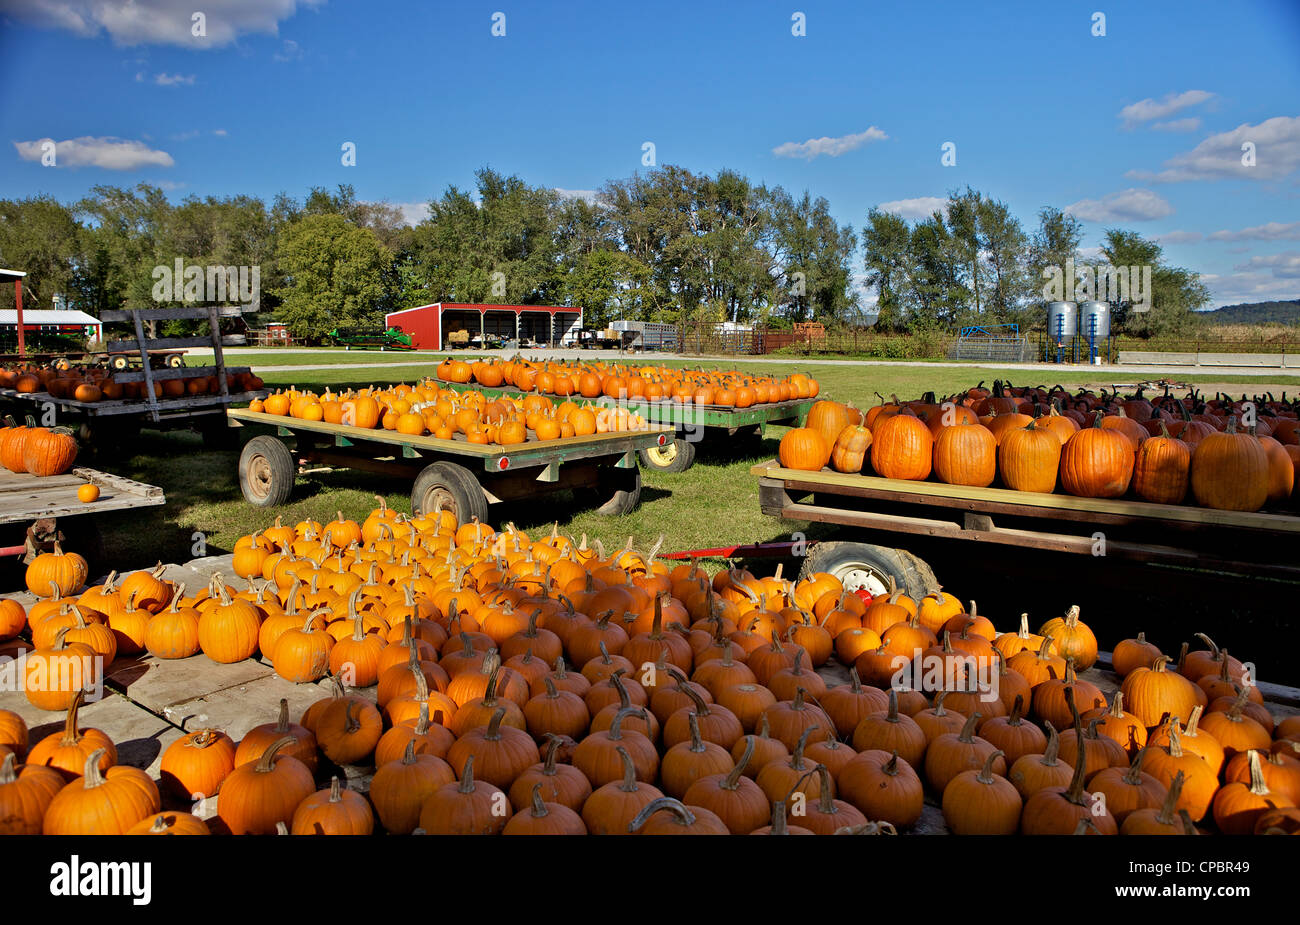 Large number of pumpkins for sale on a farm in Missouri, MO, USA Stock Photo